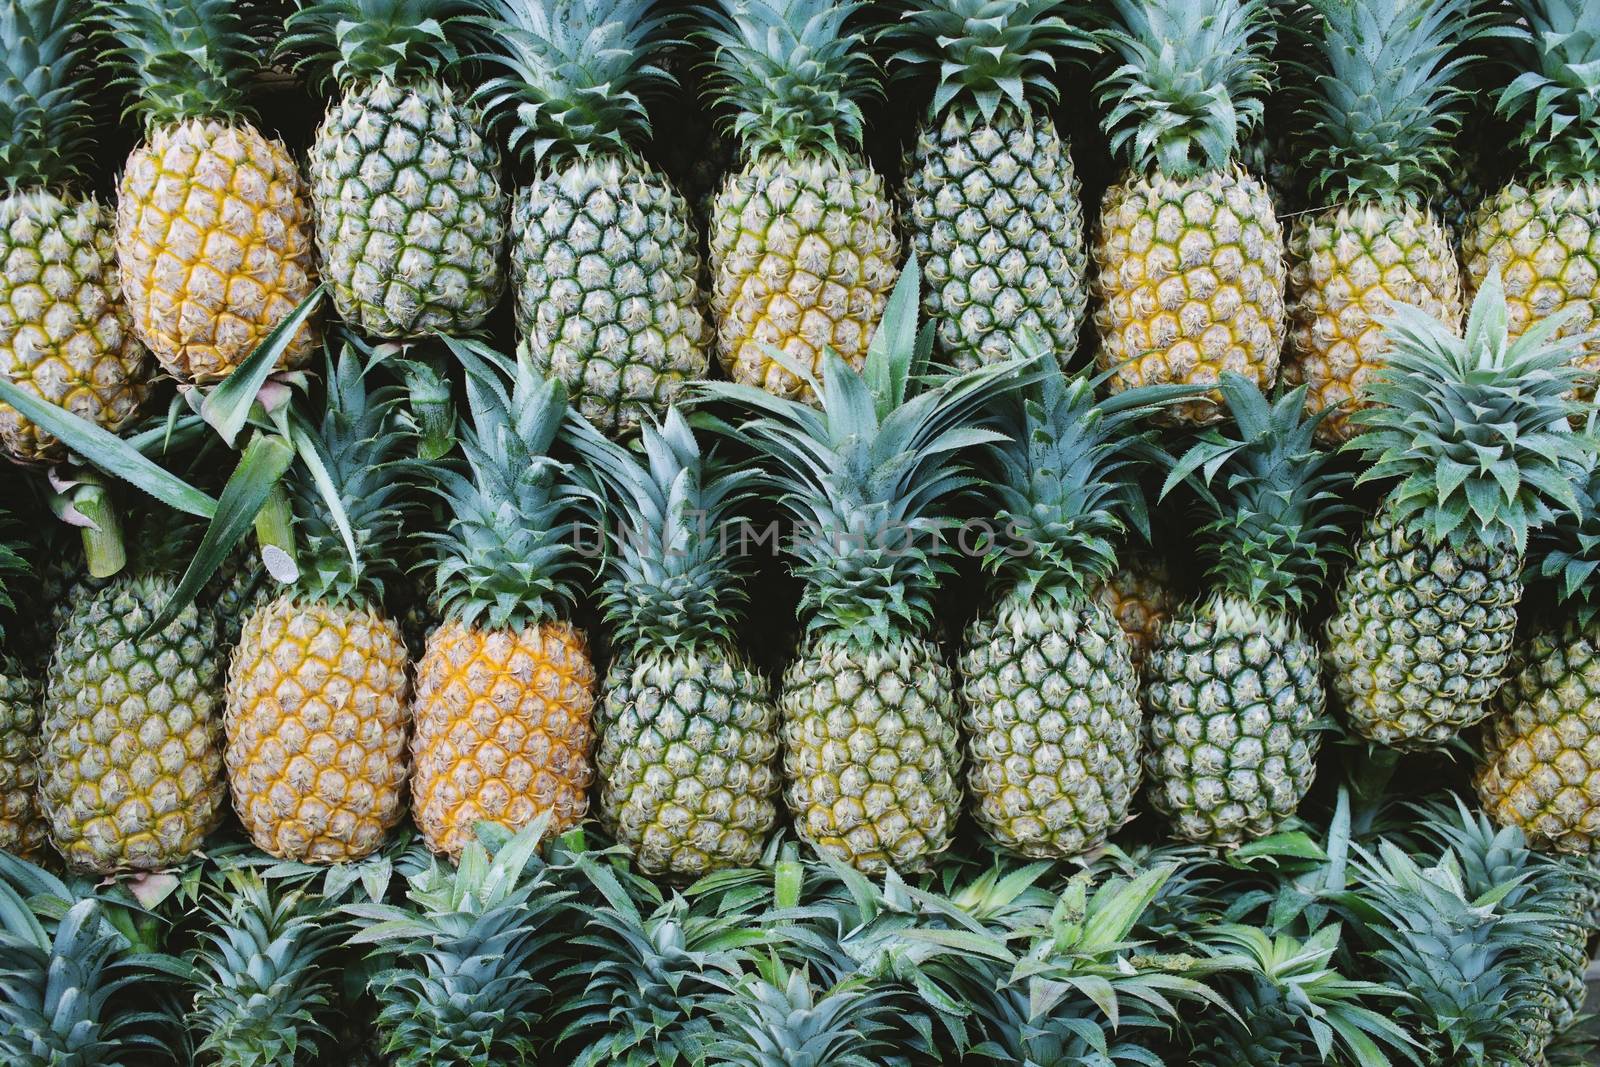 Pineapple in Supermarket Store by boytaro1428@gmail.com